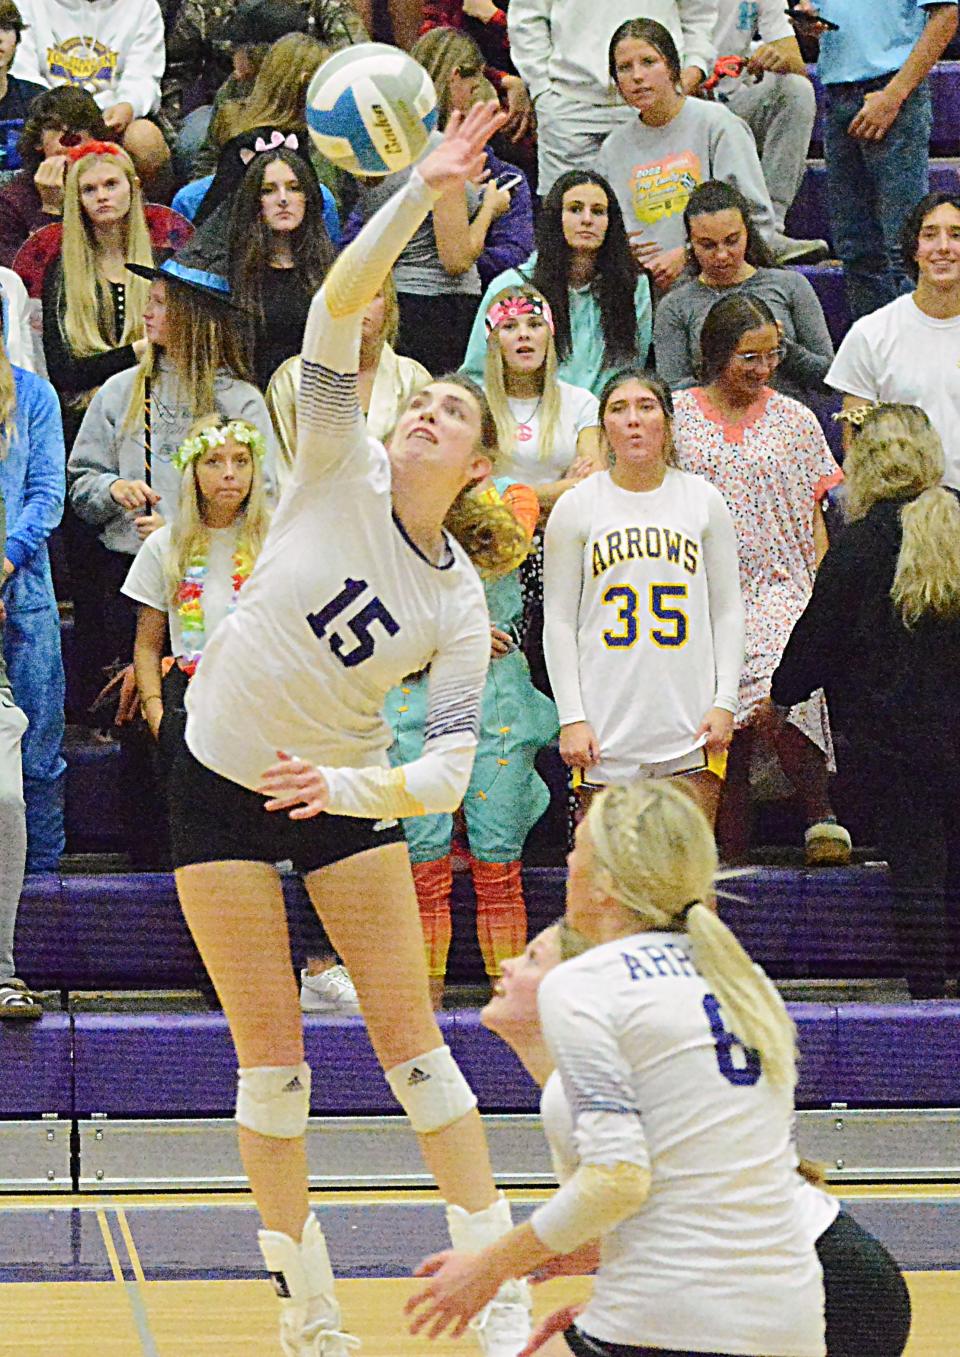 Watertown's Hannah Herzog hits the ball over the net during an Eastern South Dakota Conference volleyball match against Aberdeen Central on Tuesday, Oct. 25, 2022 in the Watertown Civic Arena. Aberdeen Central won 3-1.